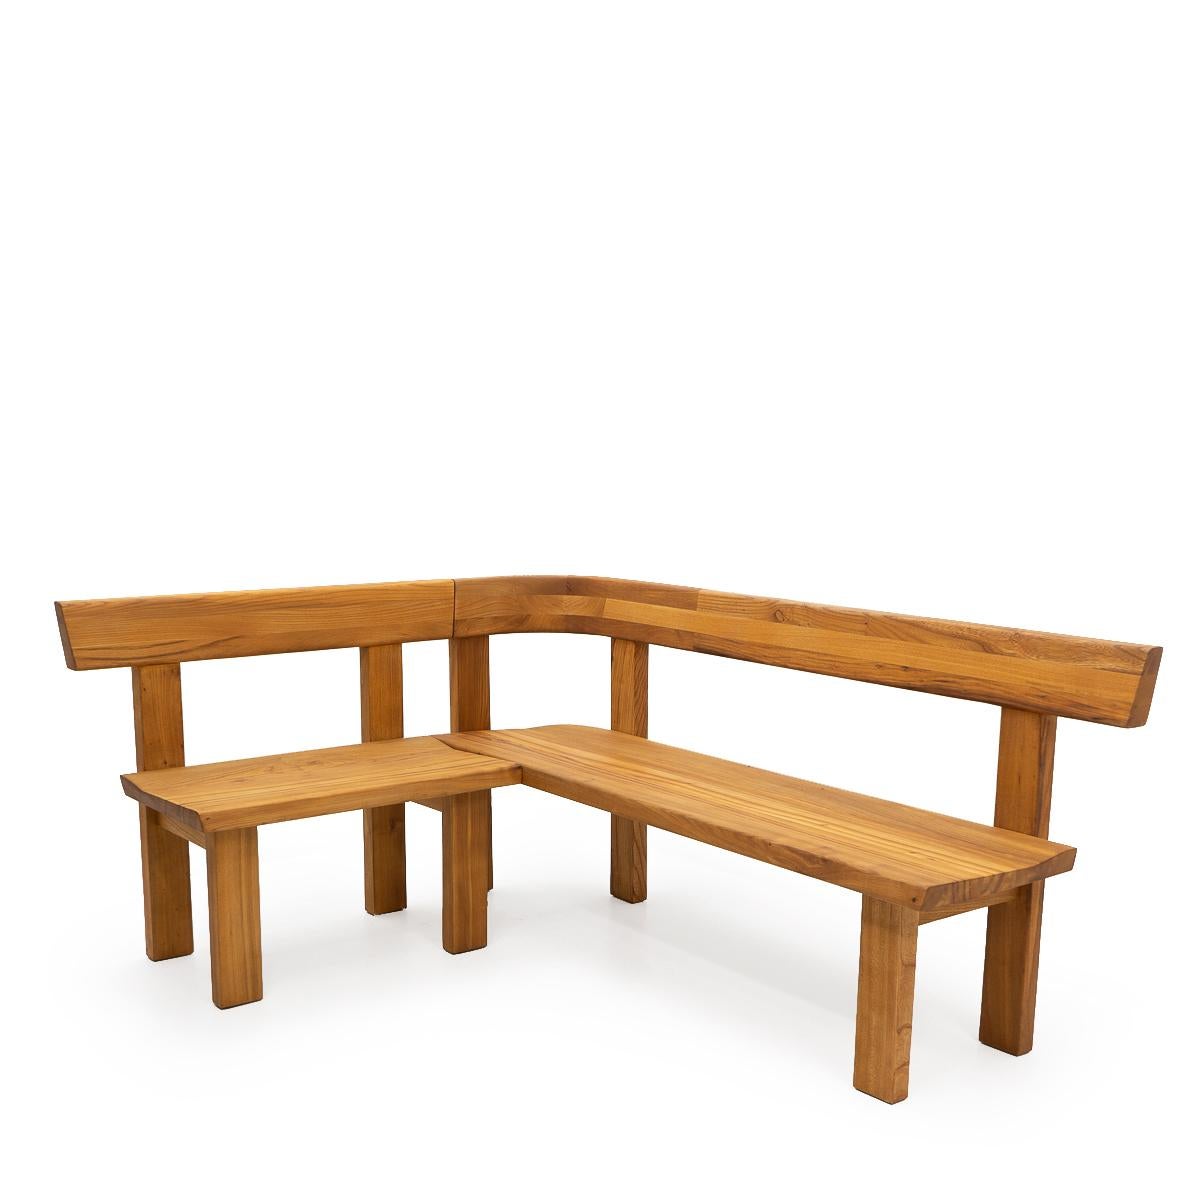 Vintage Pierre Chapo S35 “Banc à dos droit” or Straight-back bench executed in French elm.

As with all furniture by Chapo, this piece shows excellent craftsmanship, is constructed in solid wood and was made to last.

French elmwood is due to